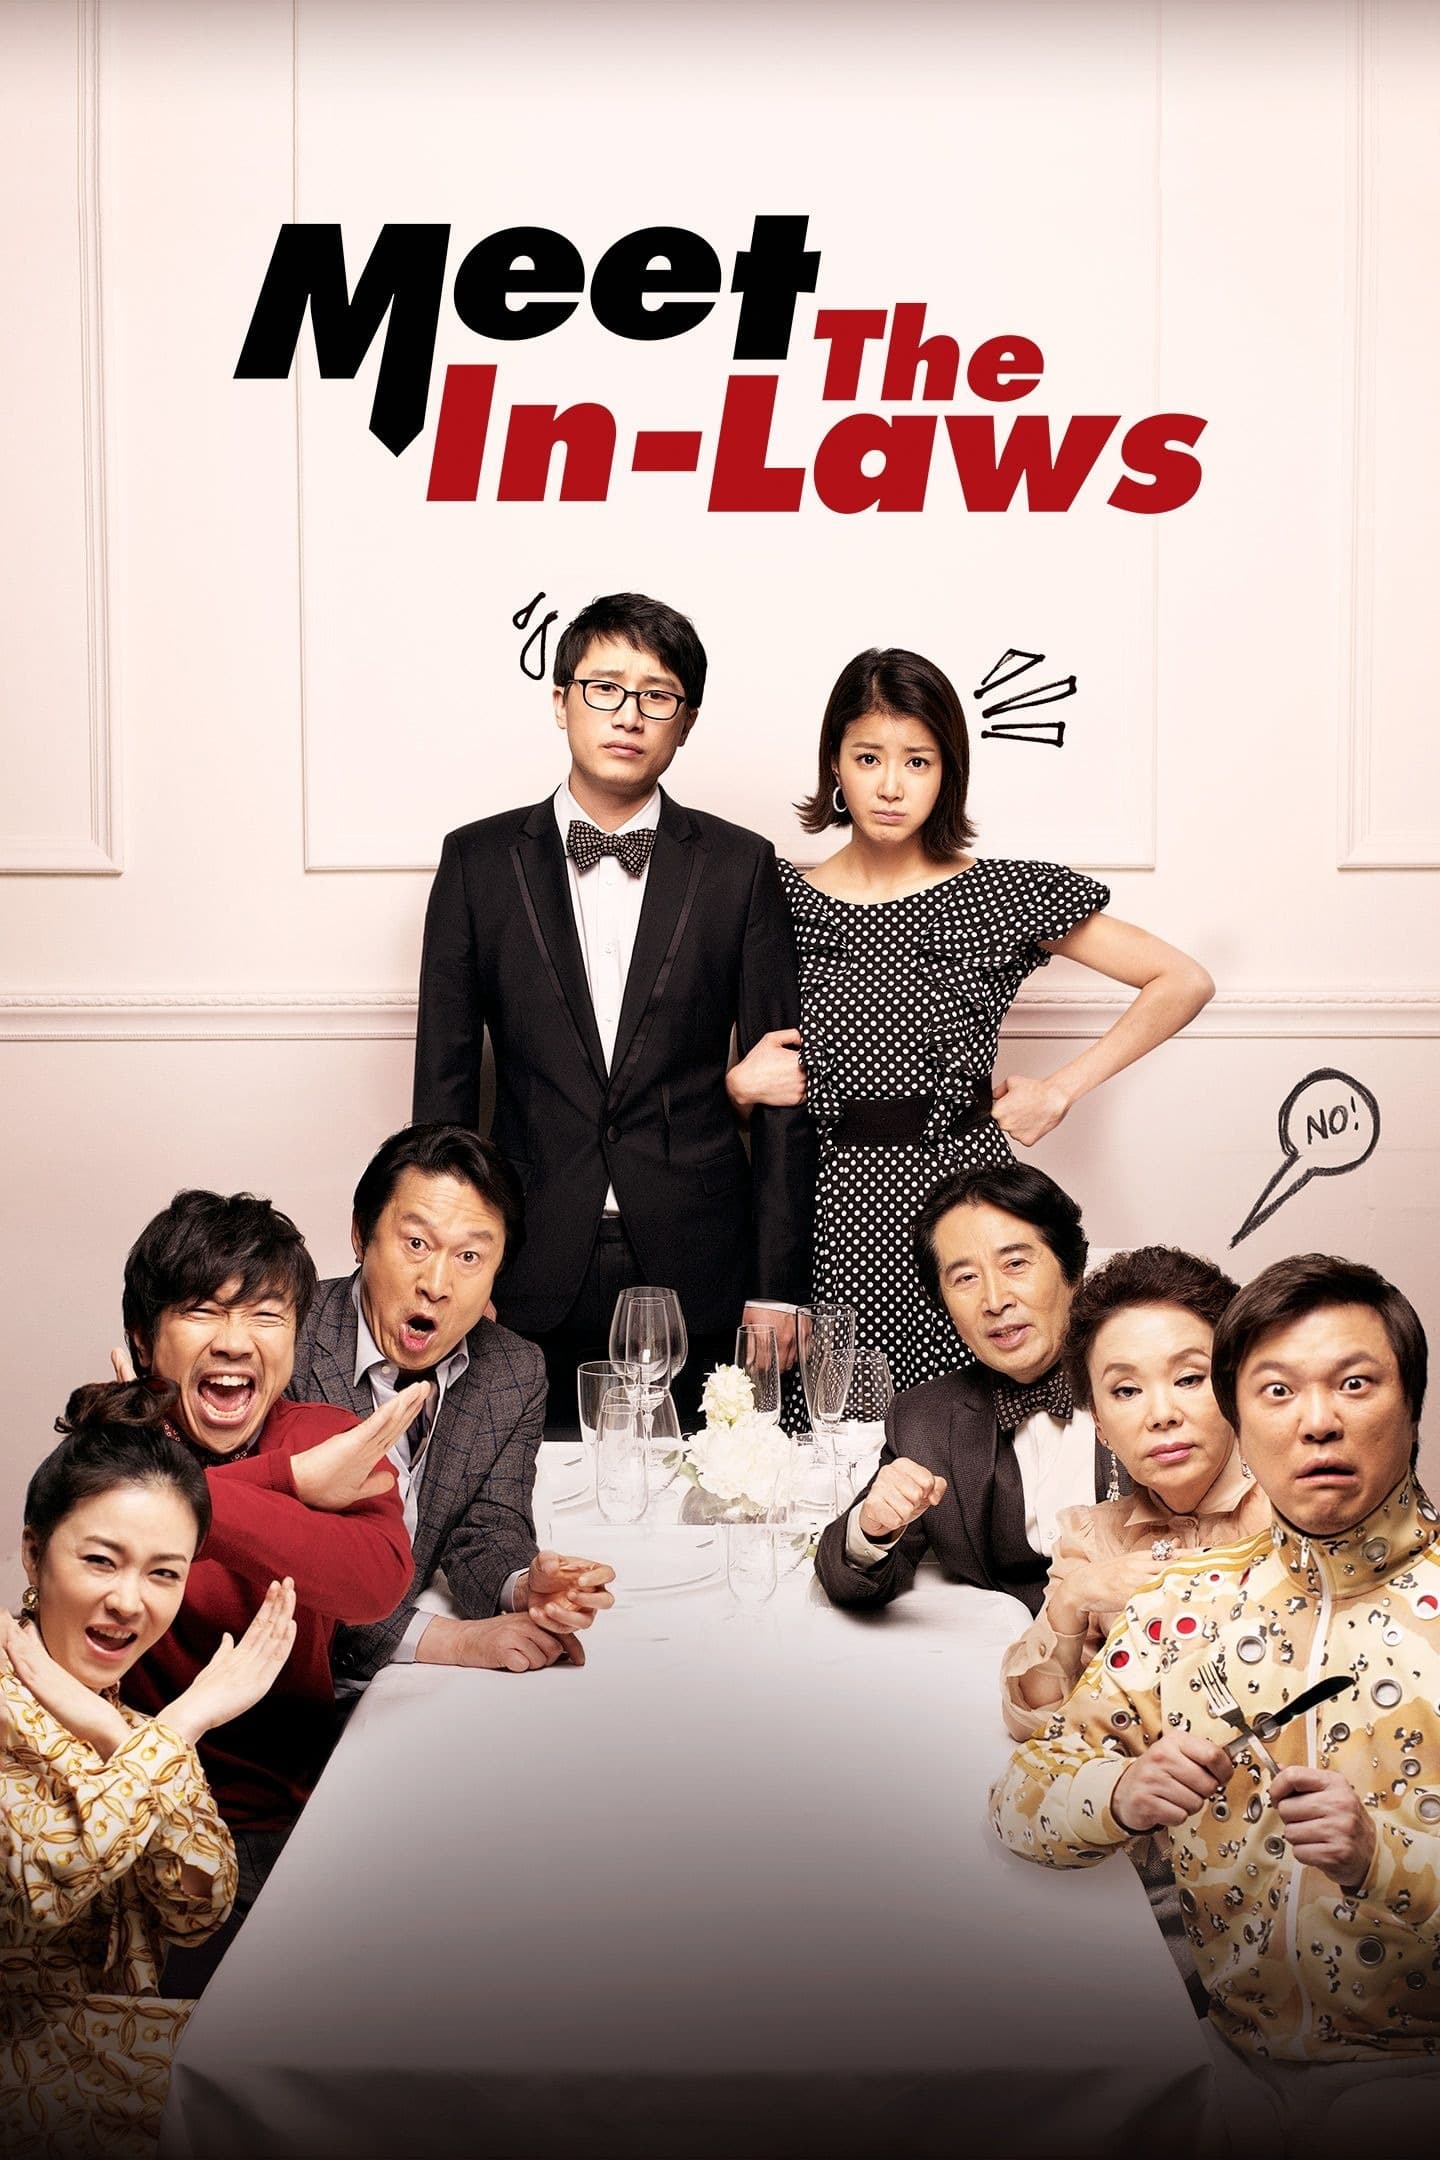 Meet the In-Laws